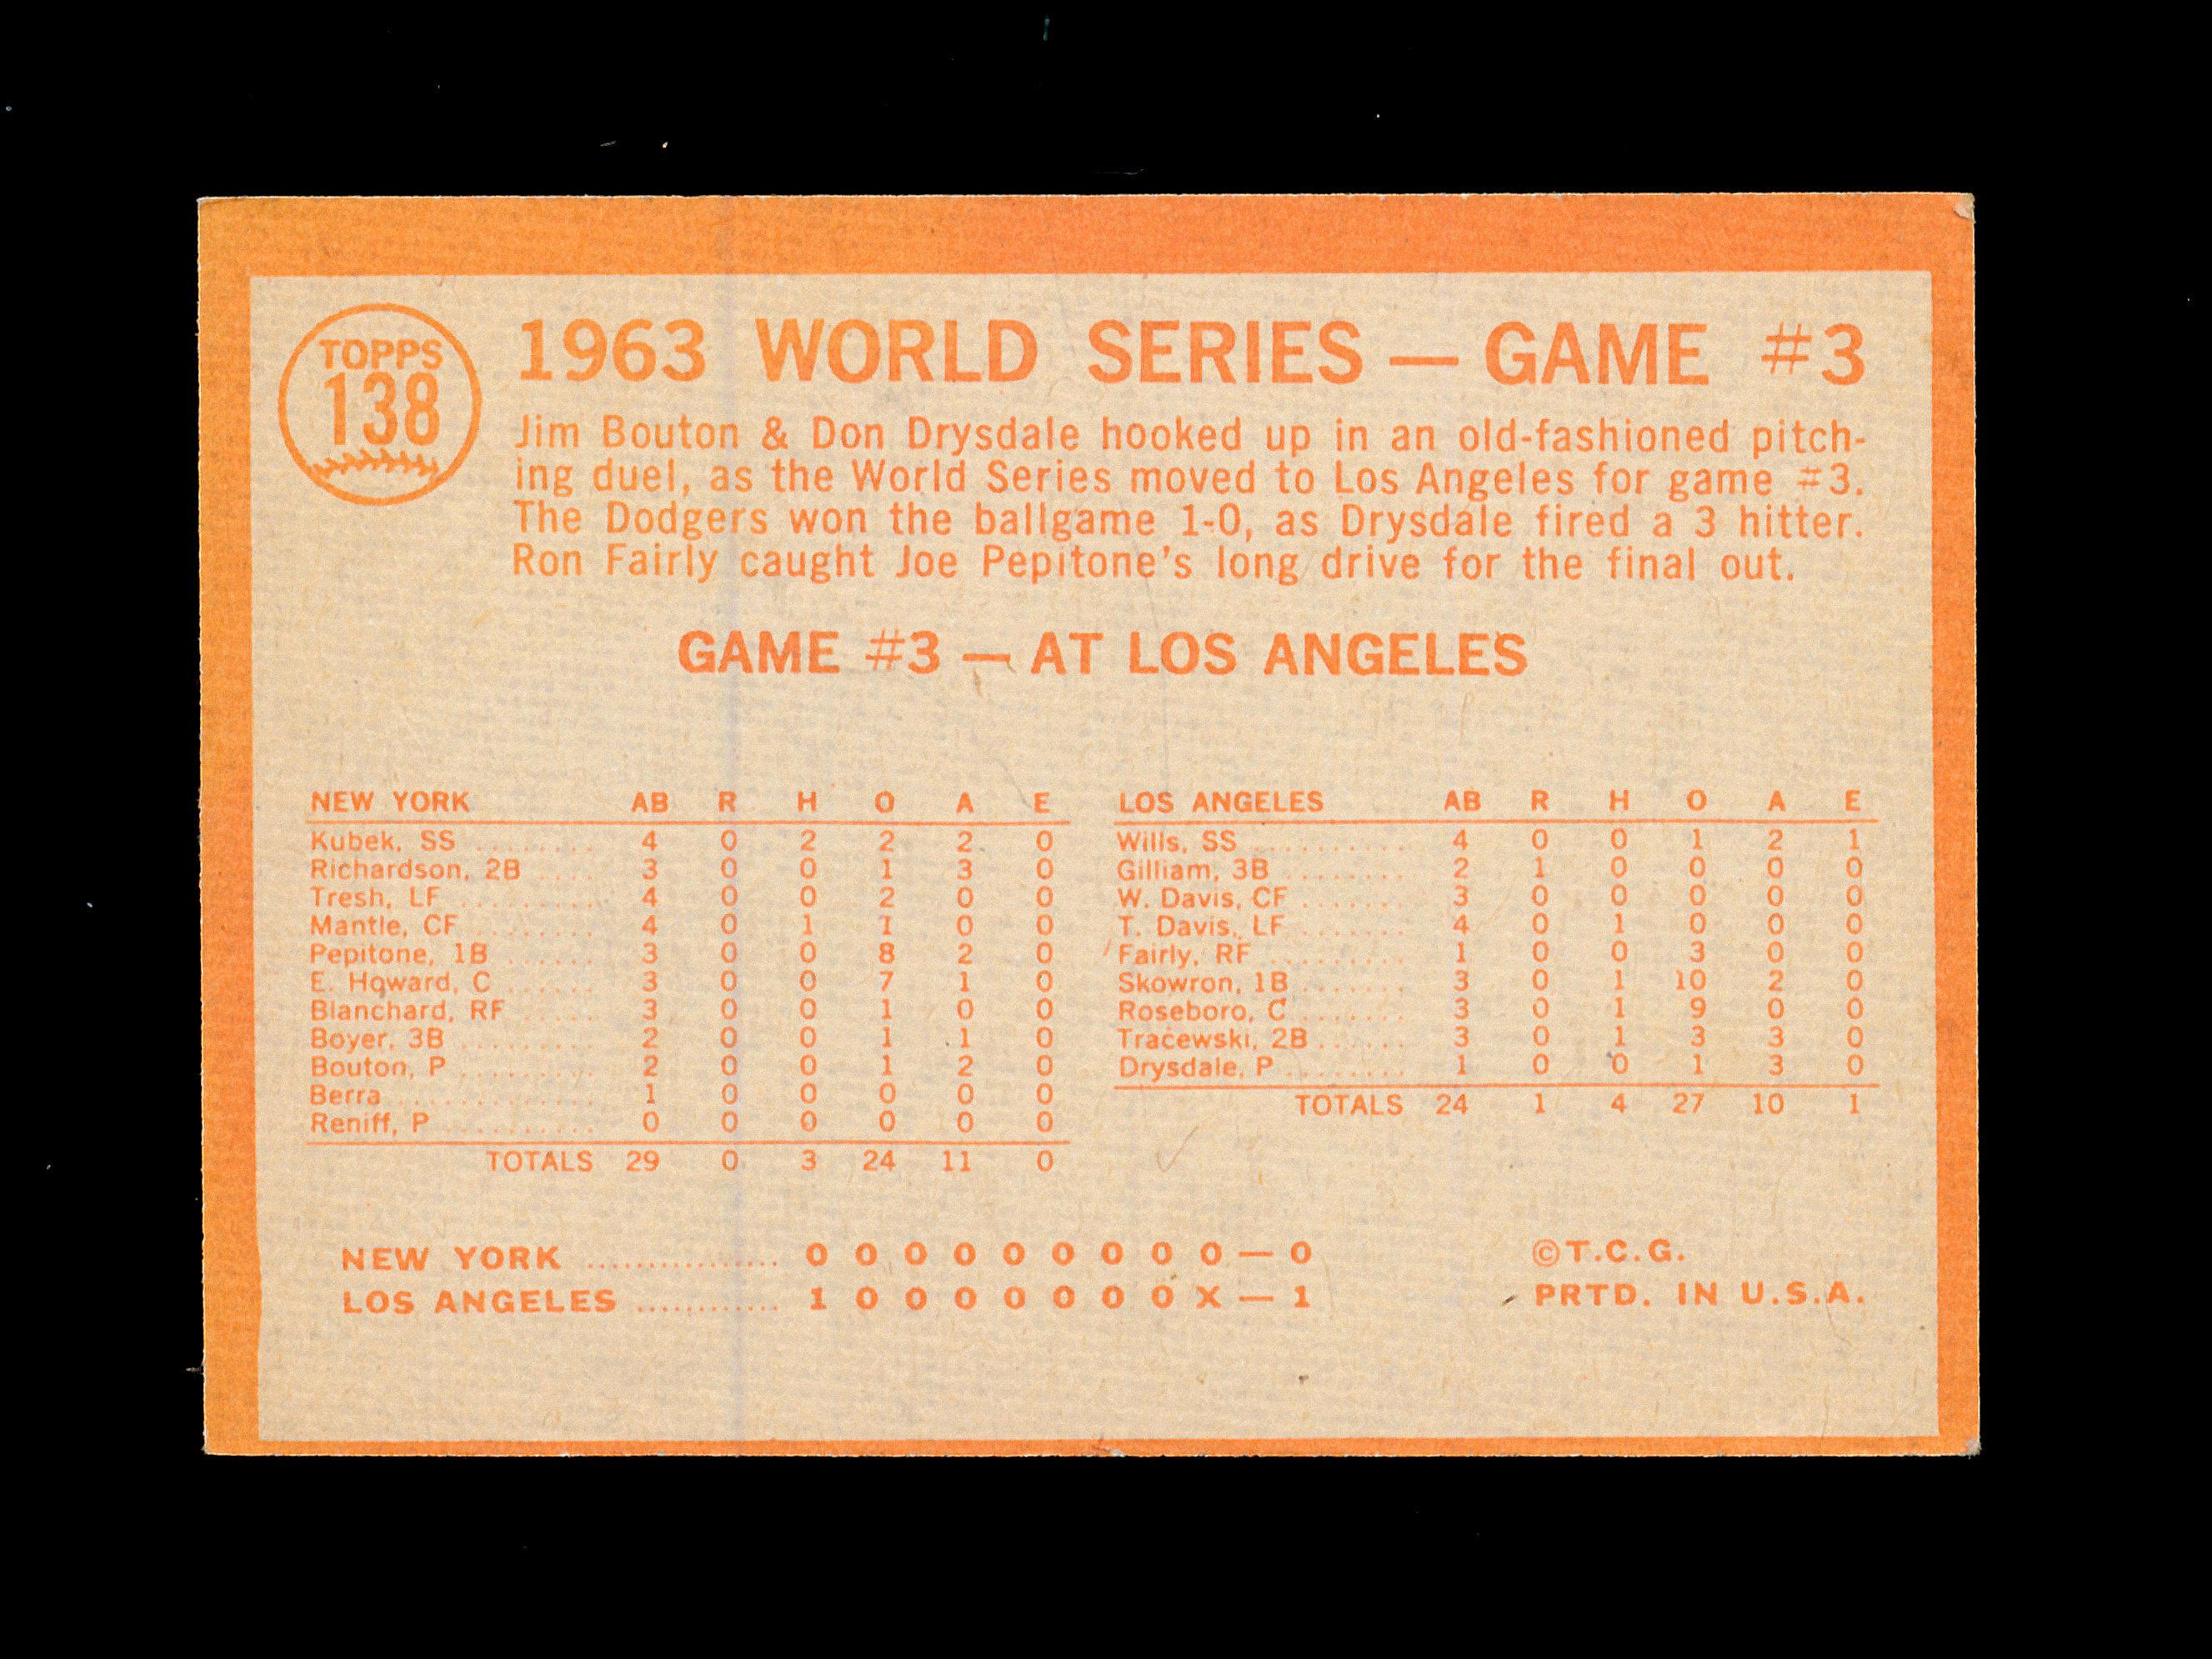 1964 Topps Baseball Card #138 World Series Game #3.  EX to EX-MT Condition.